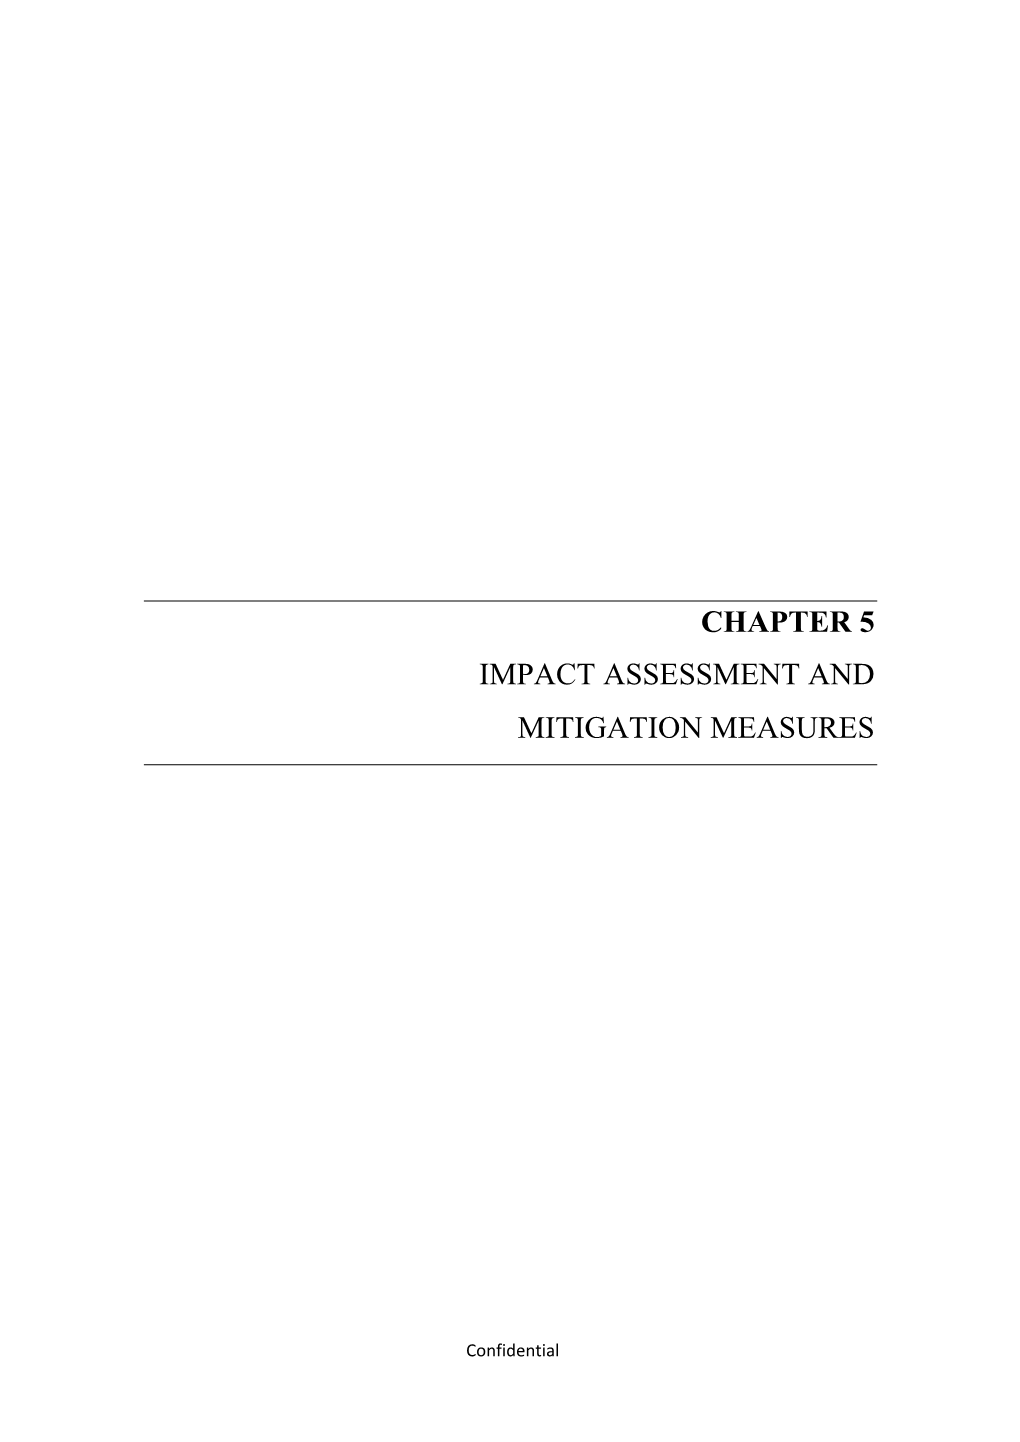 Chapter 5 Impact Assessment and Mitigation Measures